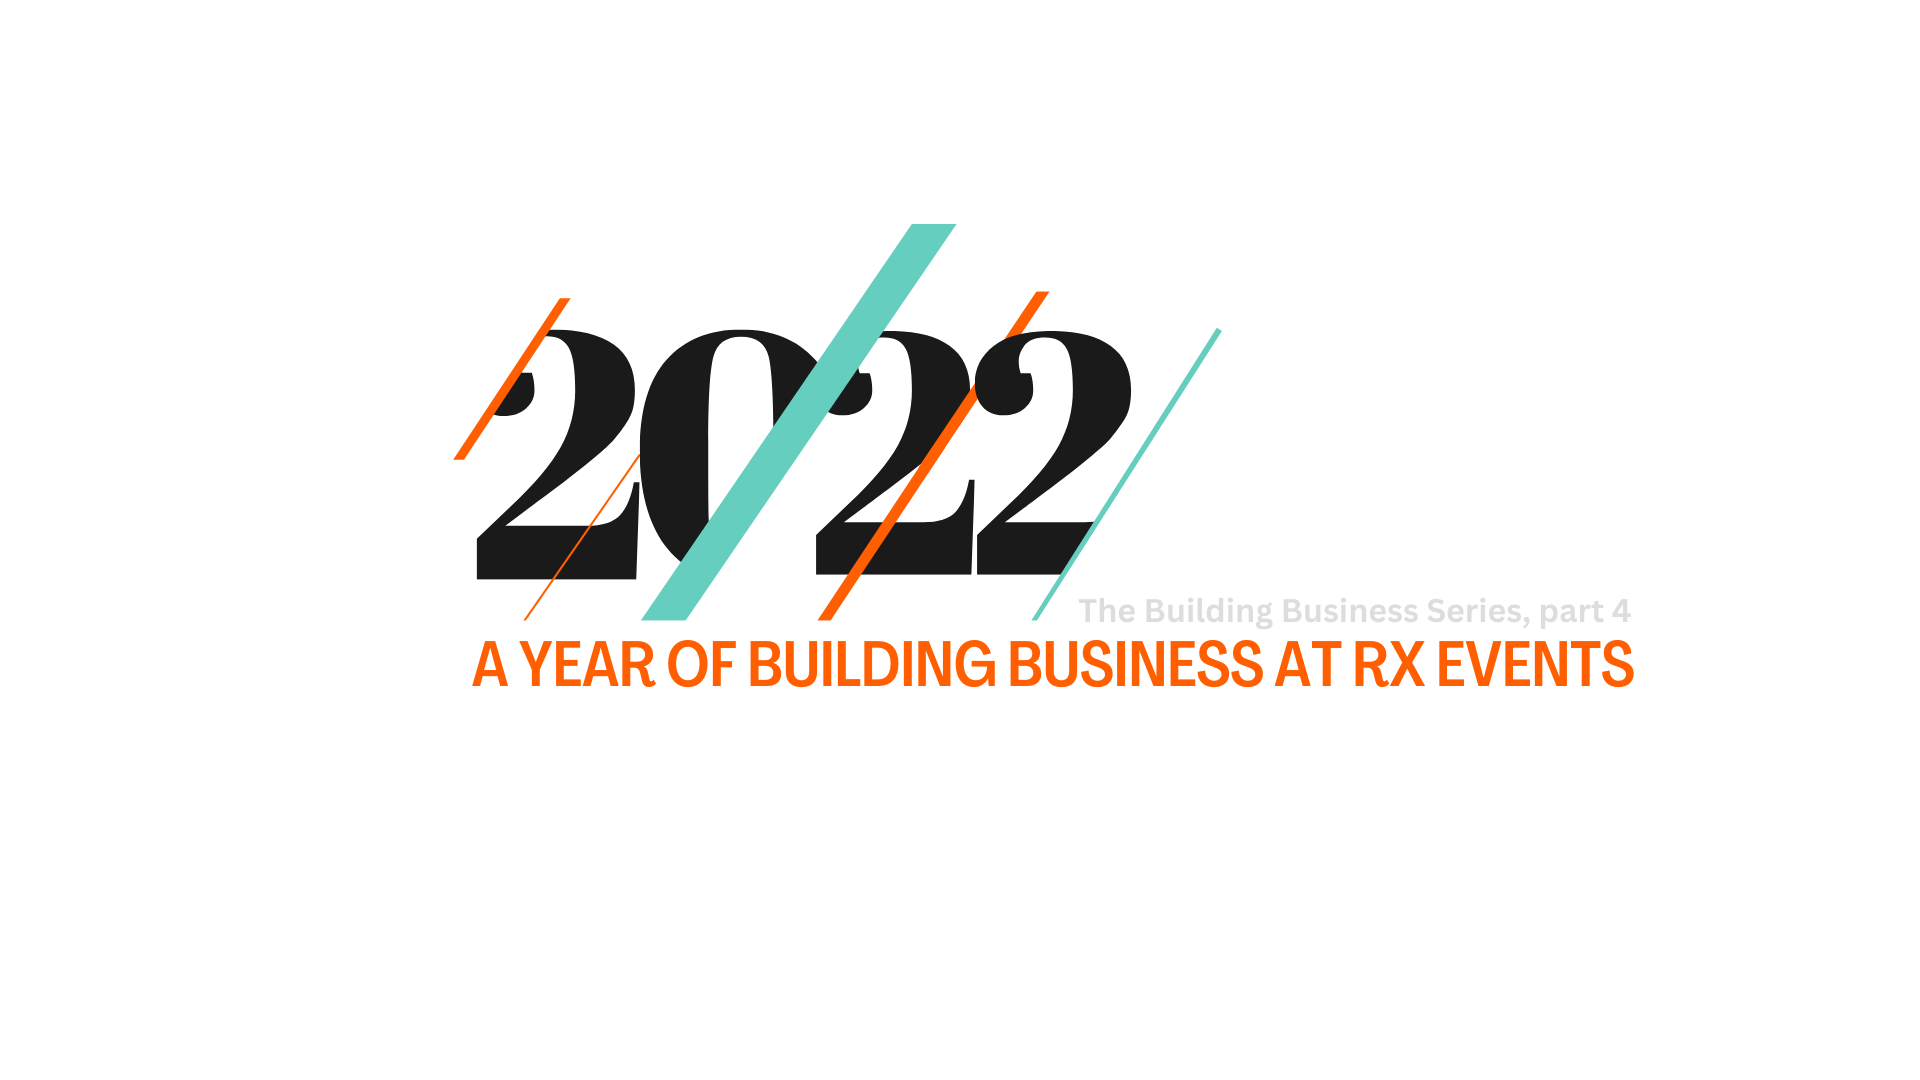 RX: Global Events - In the business of building businesses